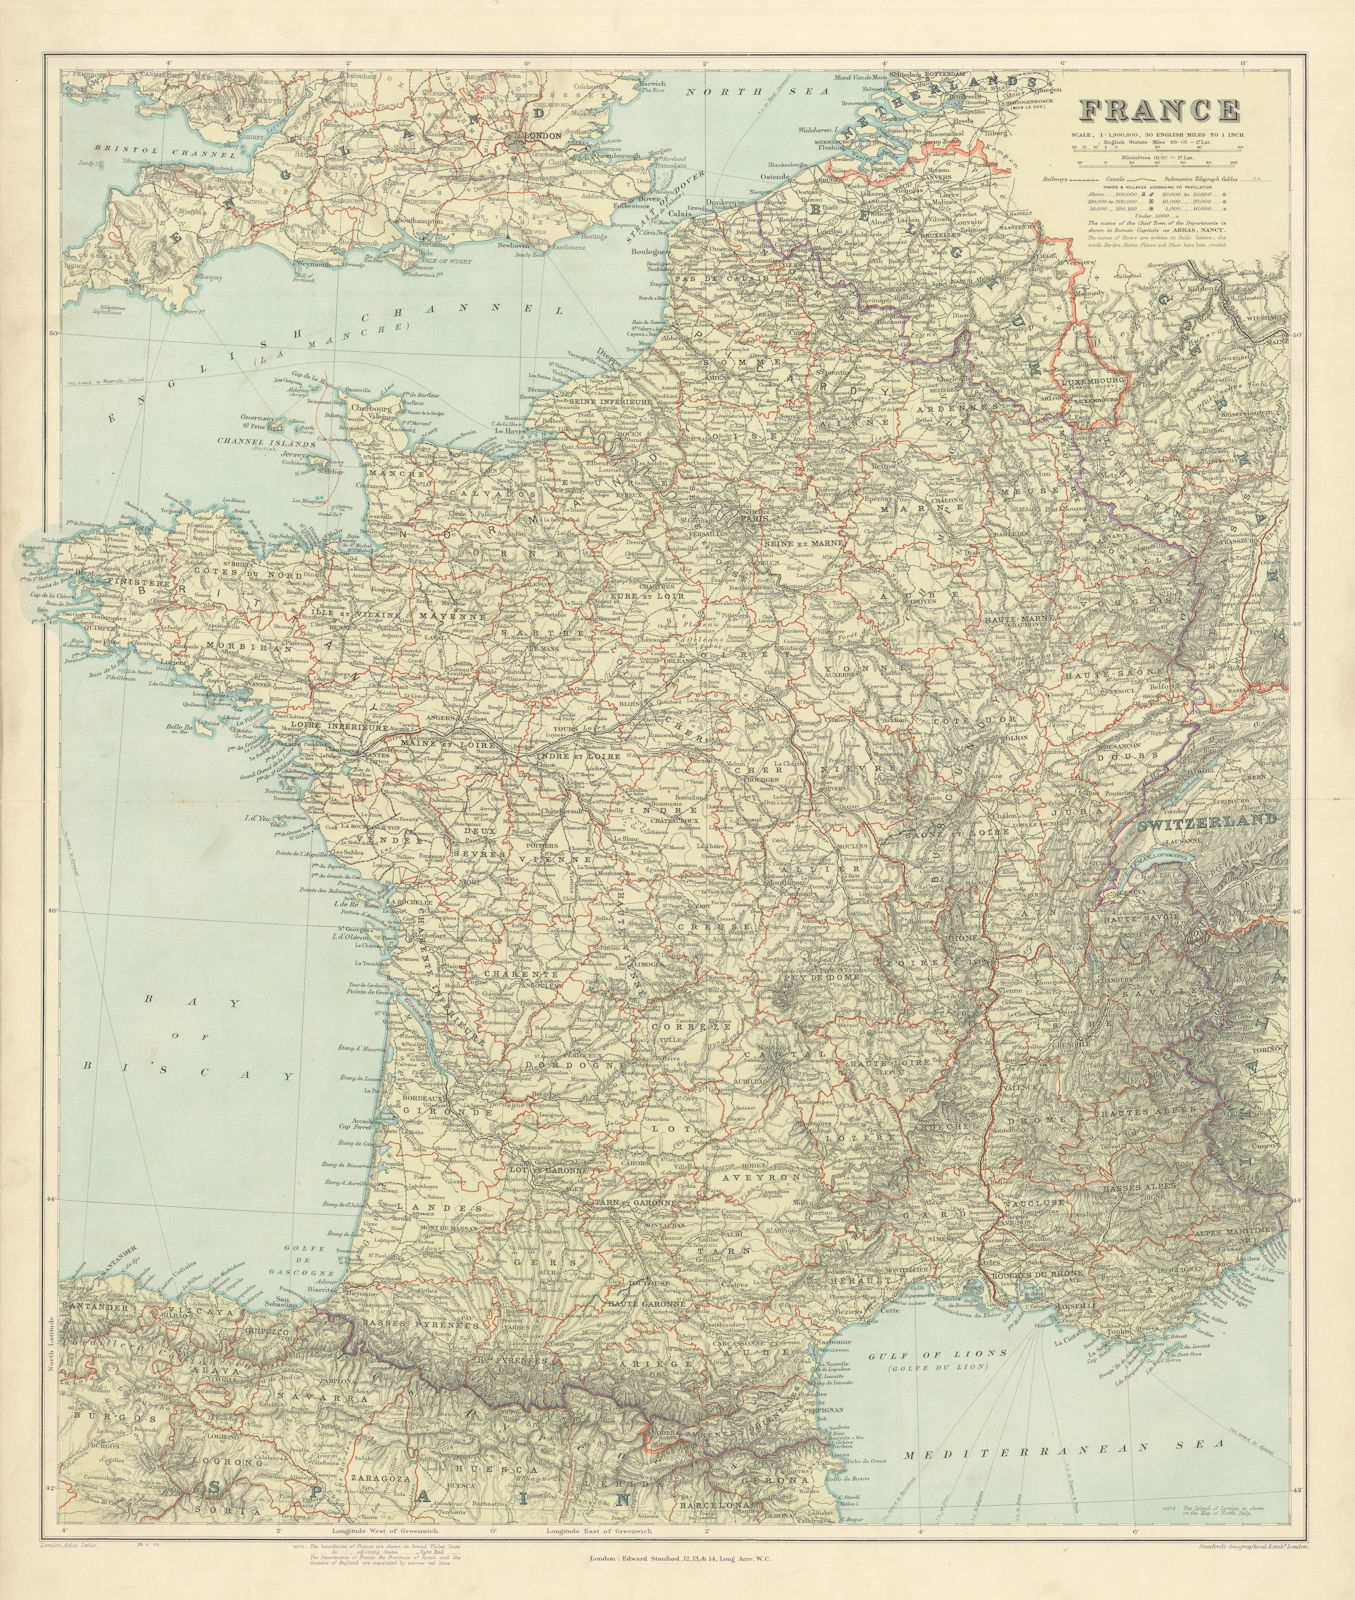 Associate Product France in departements without Alsace Lorraine. Large 65x54cm. STANFORD 1904 map